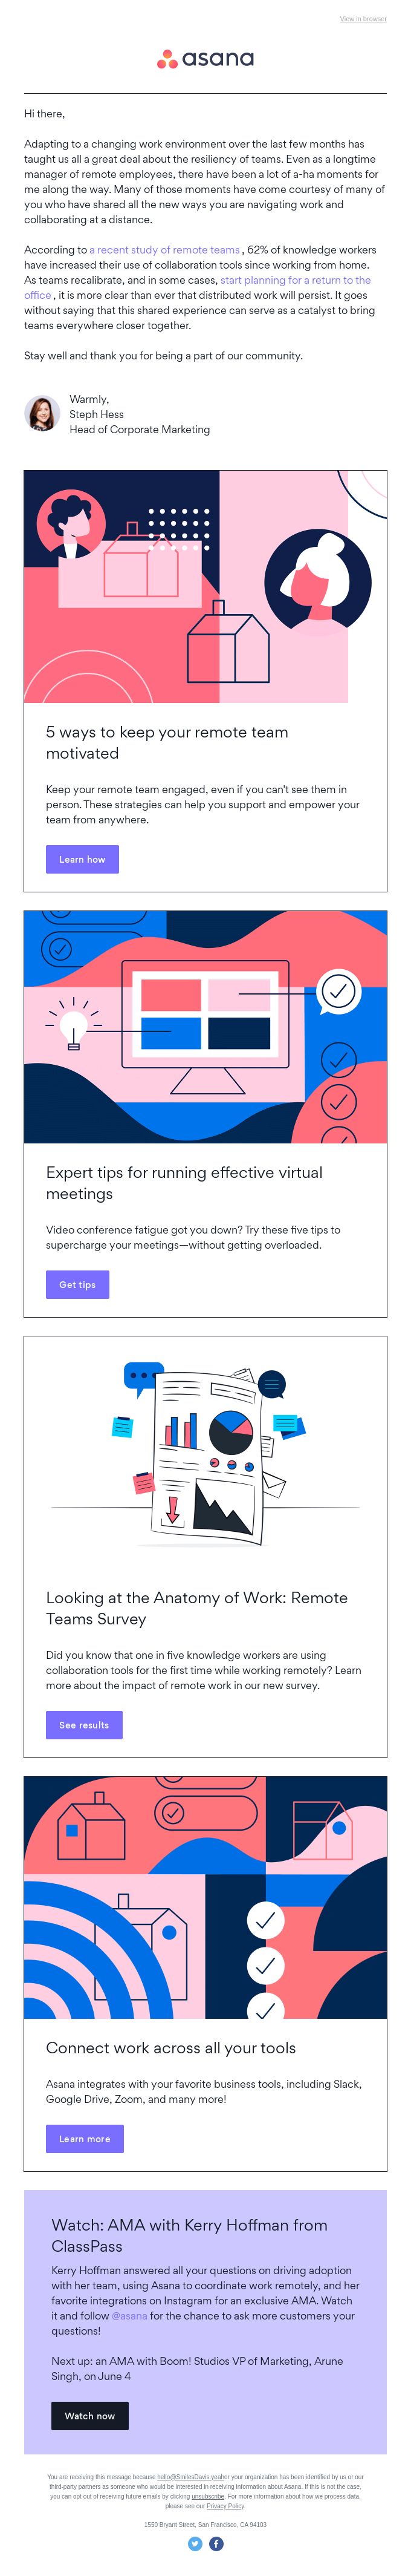 Tips to increase remote collaboration - Asana Email Newsletter